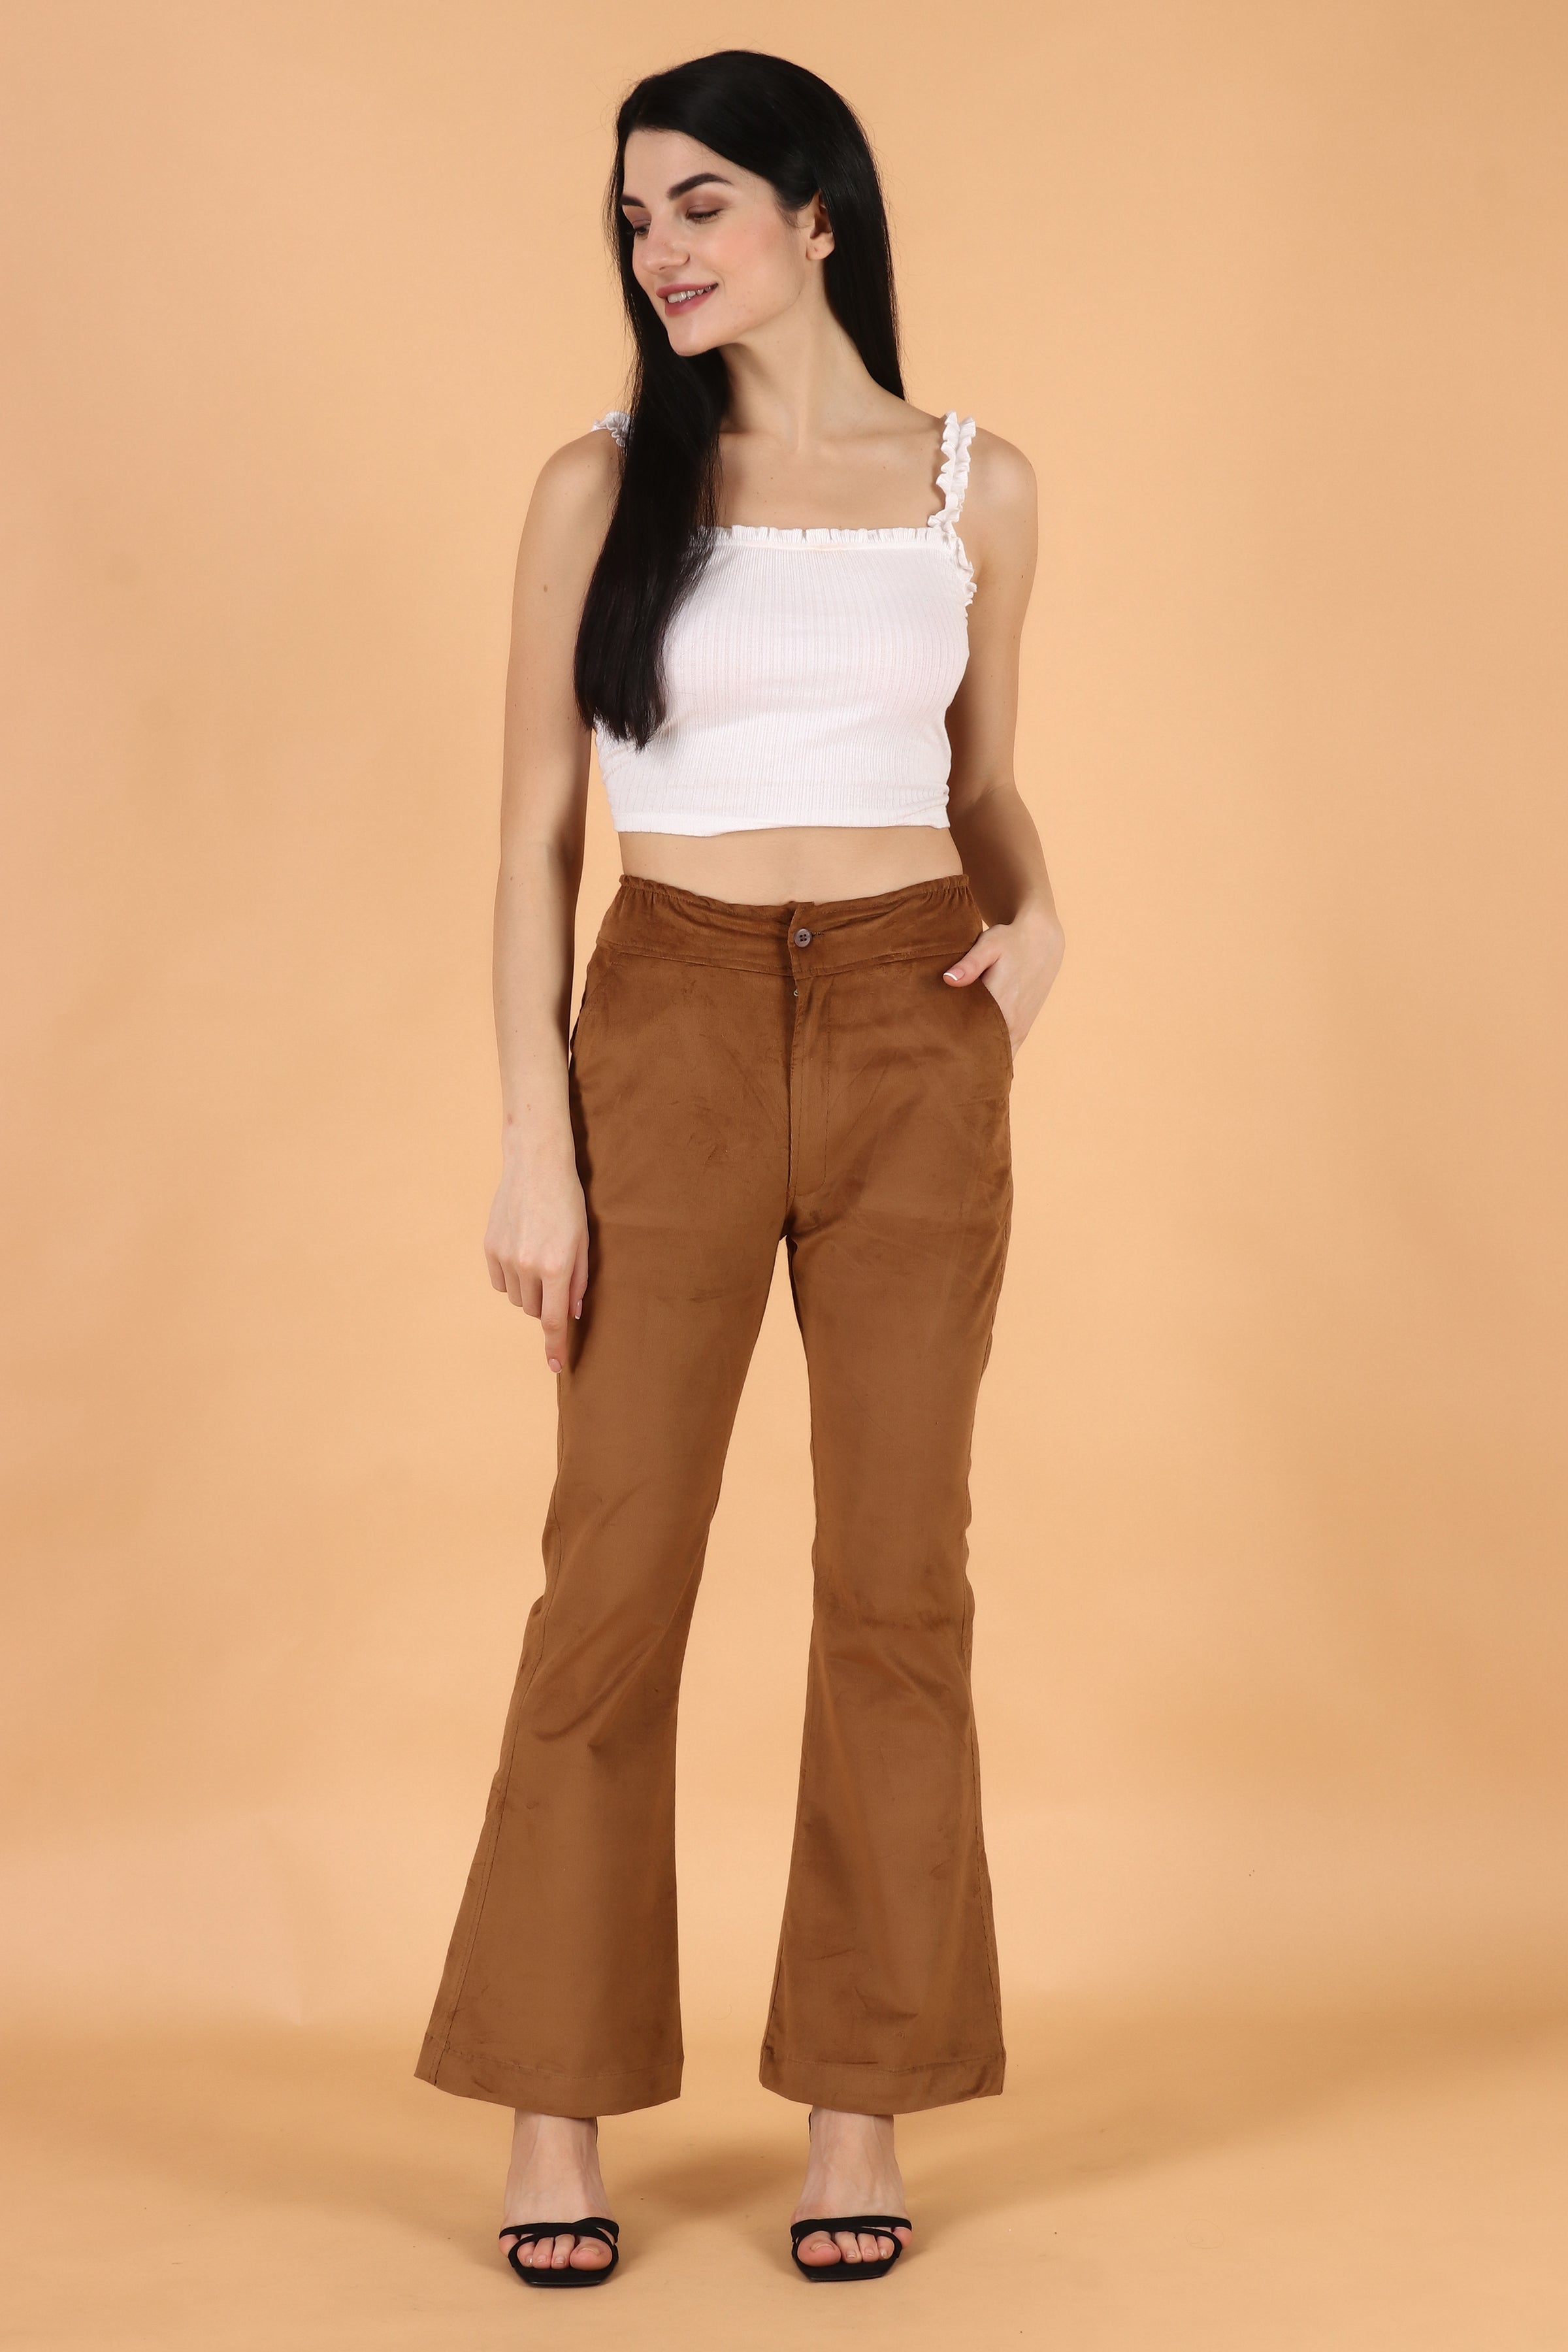 Buttons Apricot Black Flare Pants for Women Trousers Korean Fashion Casual  Office Lady Female High Waist